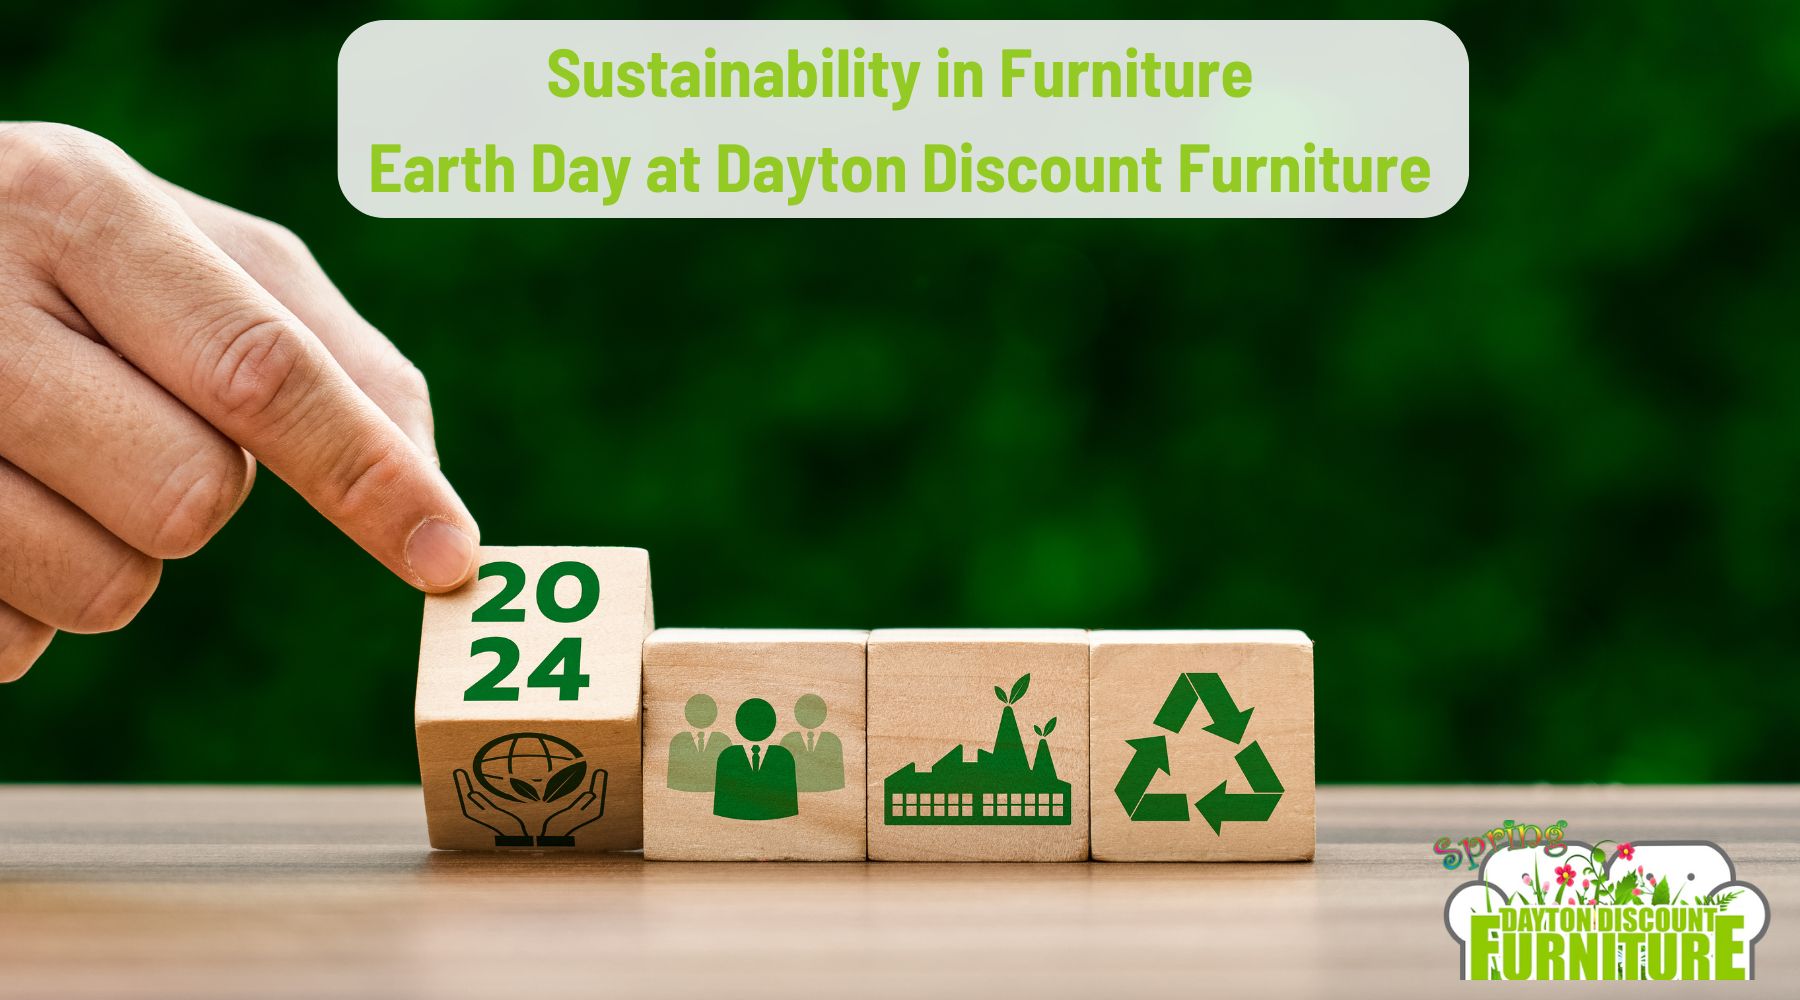 Partnering-for-a-Greener-Future-Dayton-Discount-Furniture-and-Ashley-Furniture-s-Earth-Day-Commitment-to-Sustainability Dayton Discount Furniture